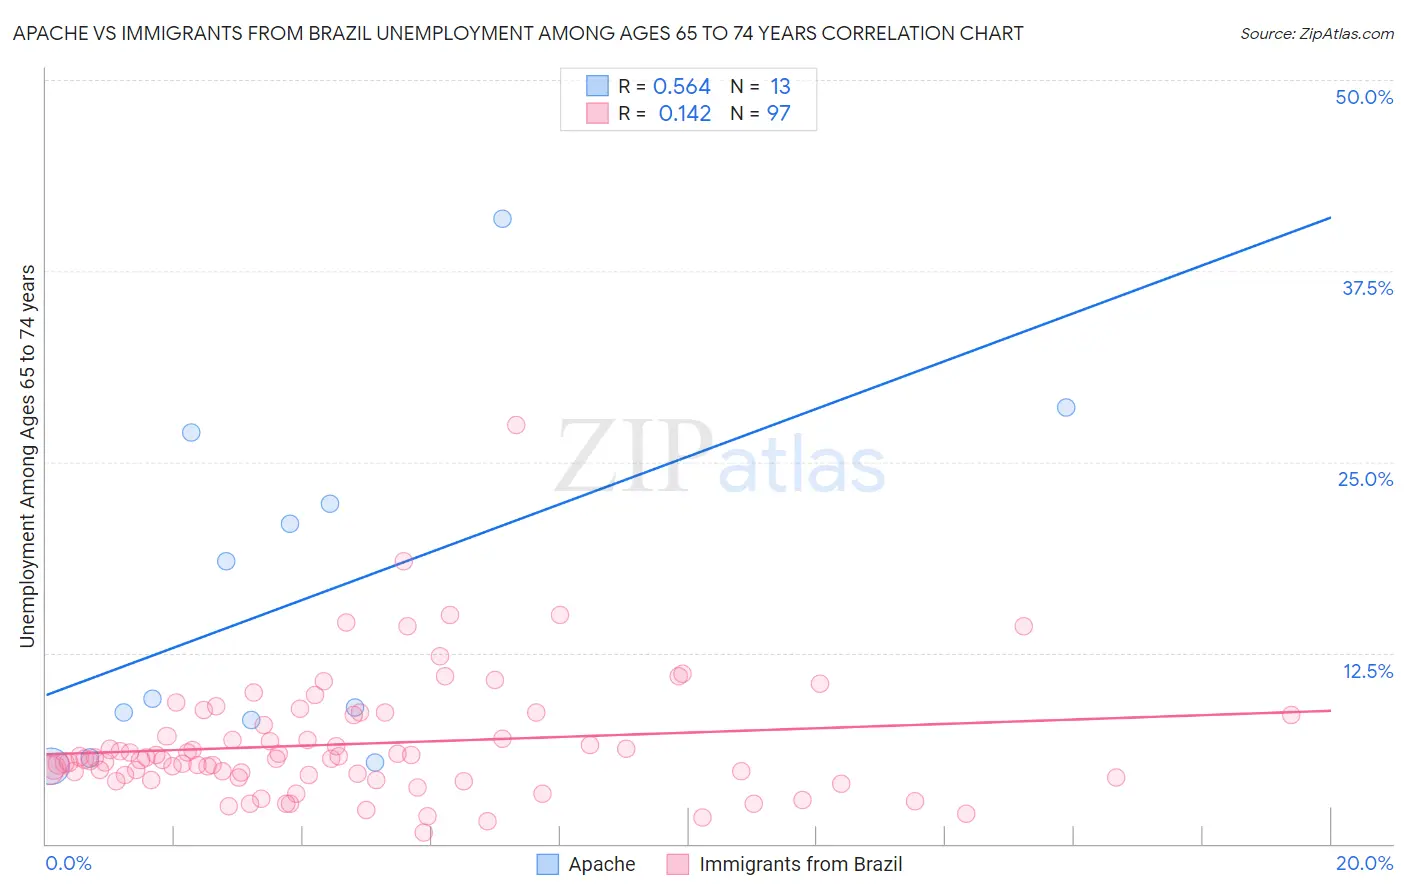 Apache vs Immigrants from Brazil Unemployment Among Ages 65 to 74 years